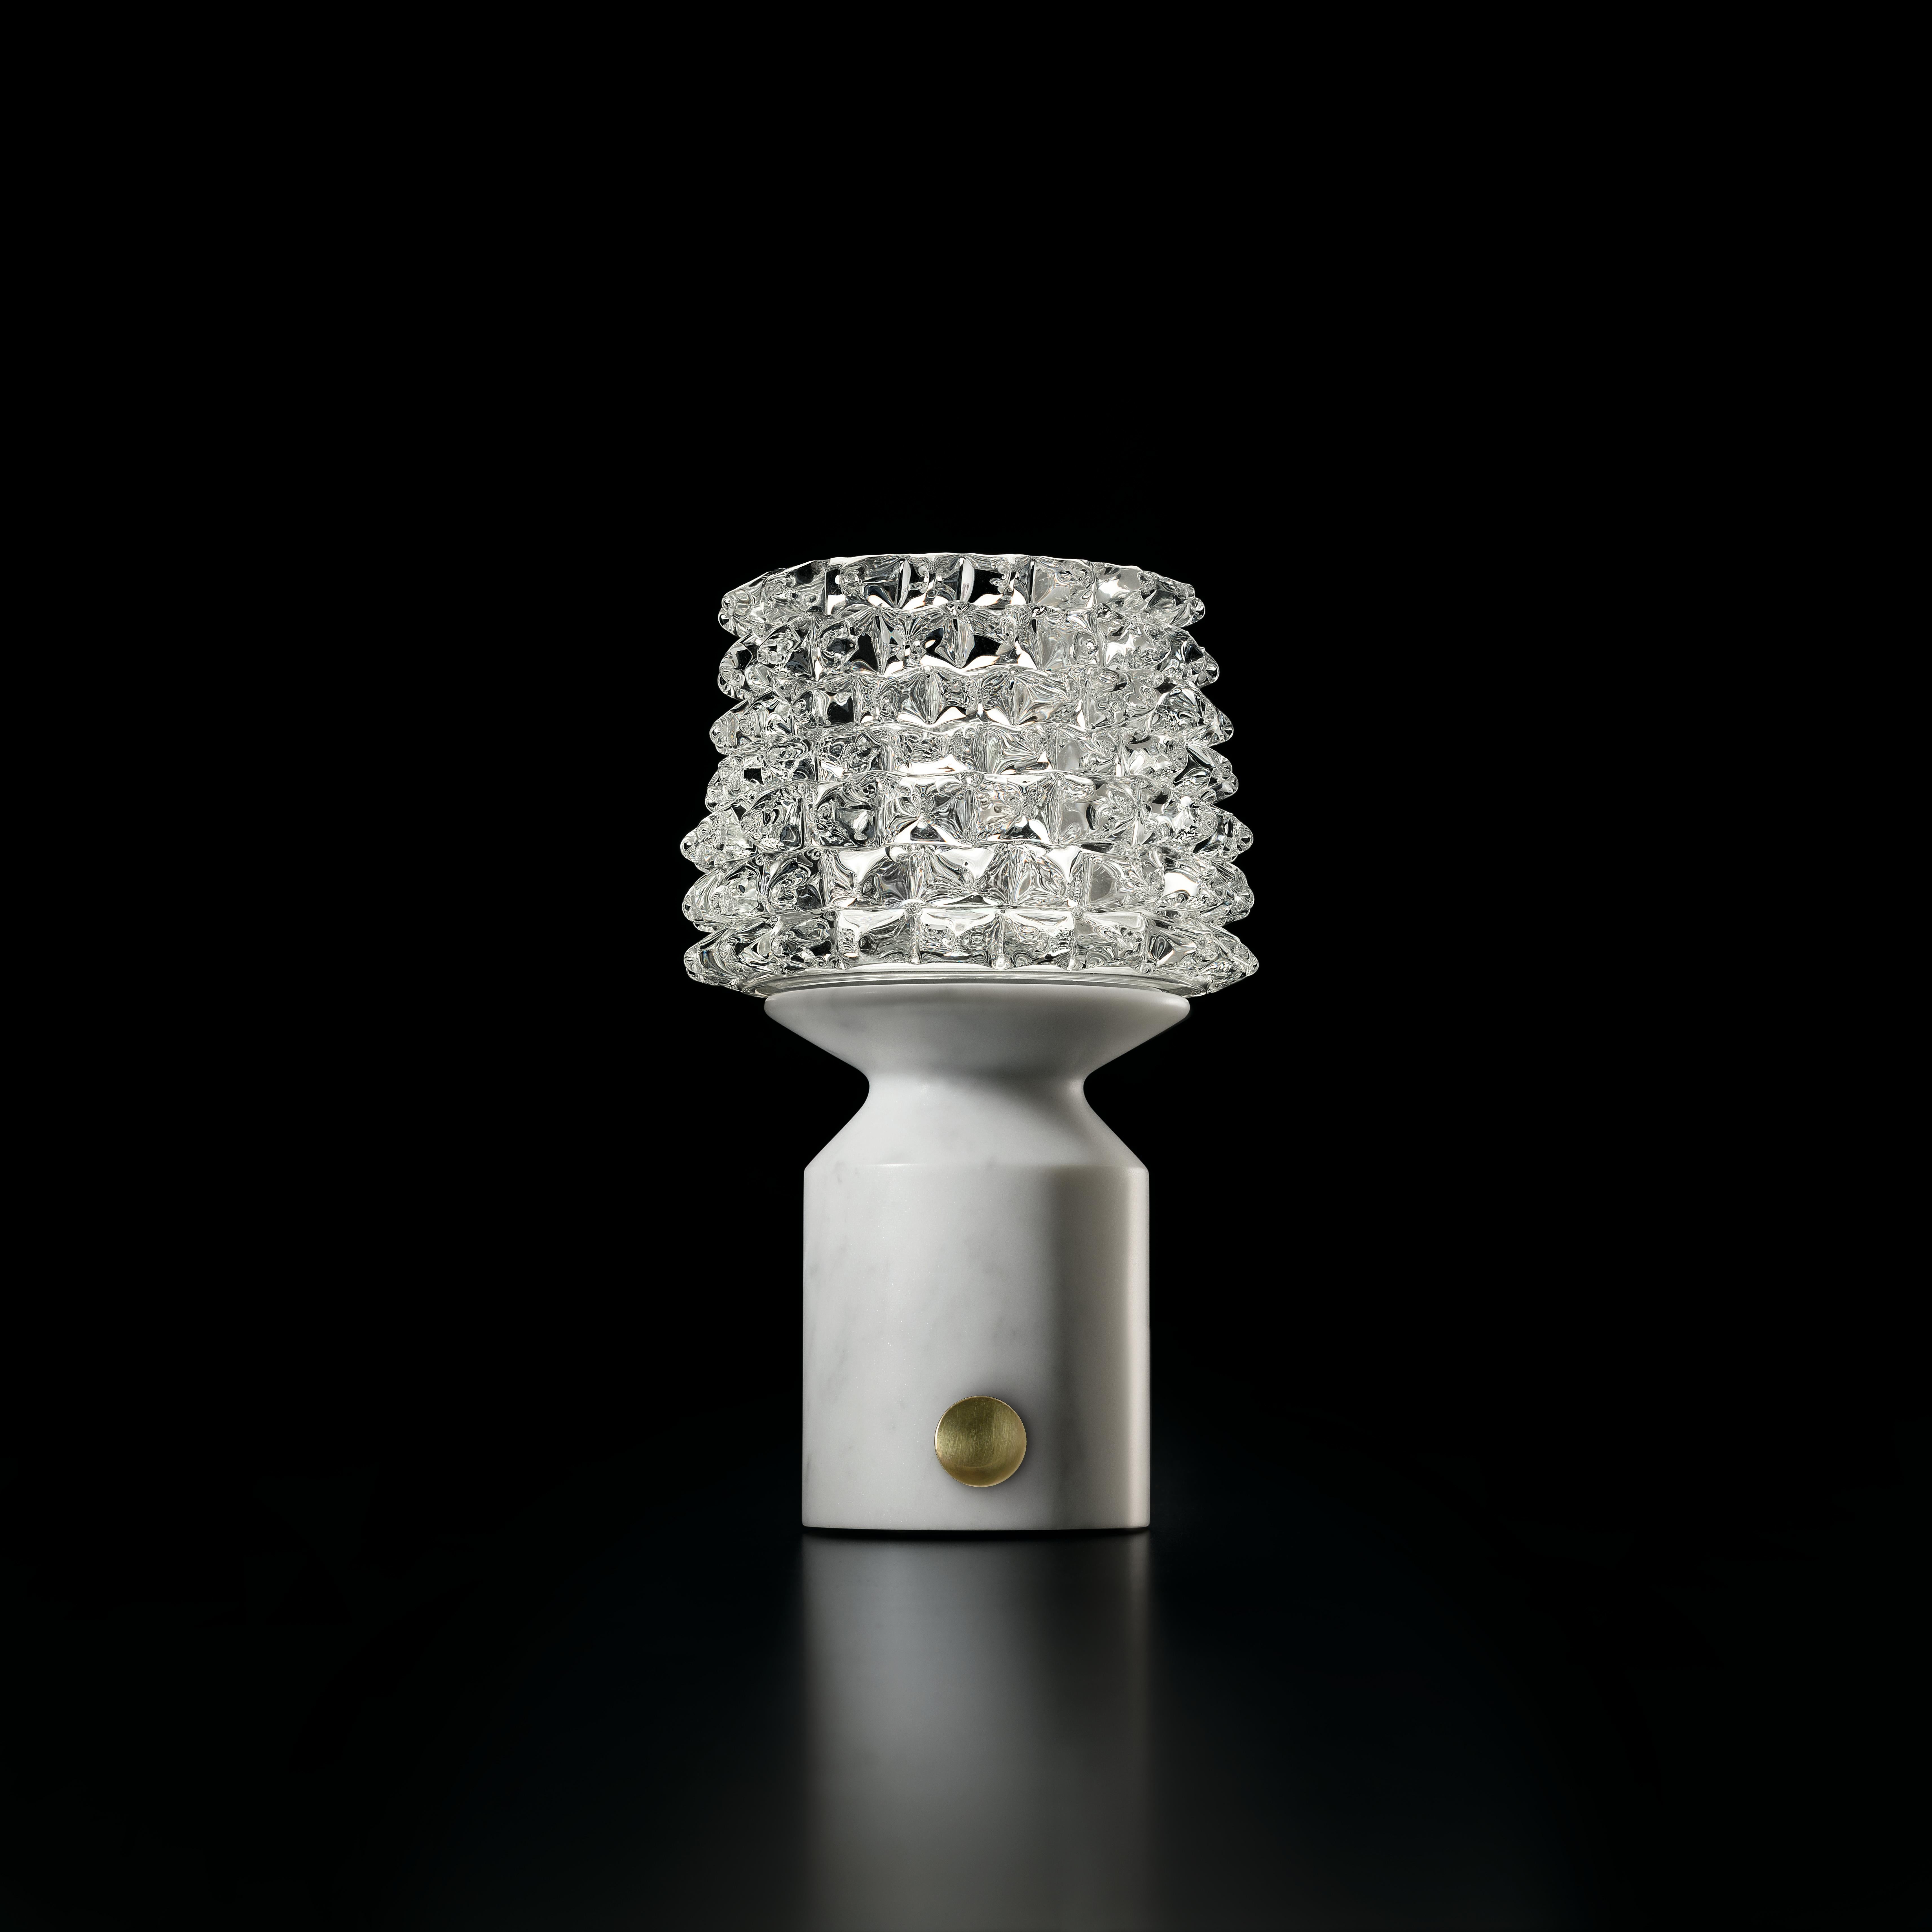 Camparino is an elegant, sophisticated table lamp that brings together past and present in a single, compact piece. On the one hand it reflects Murano glassmaking tradition, in that it uses the “rostrato” technique; on the other, it represents the